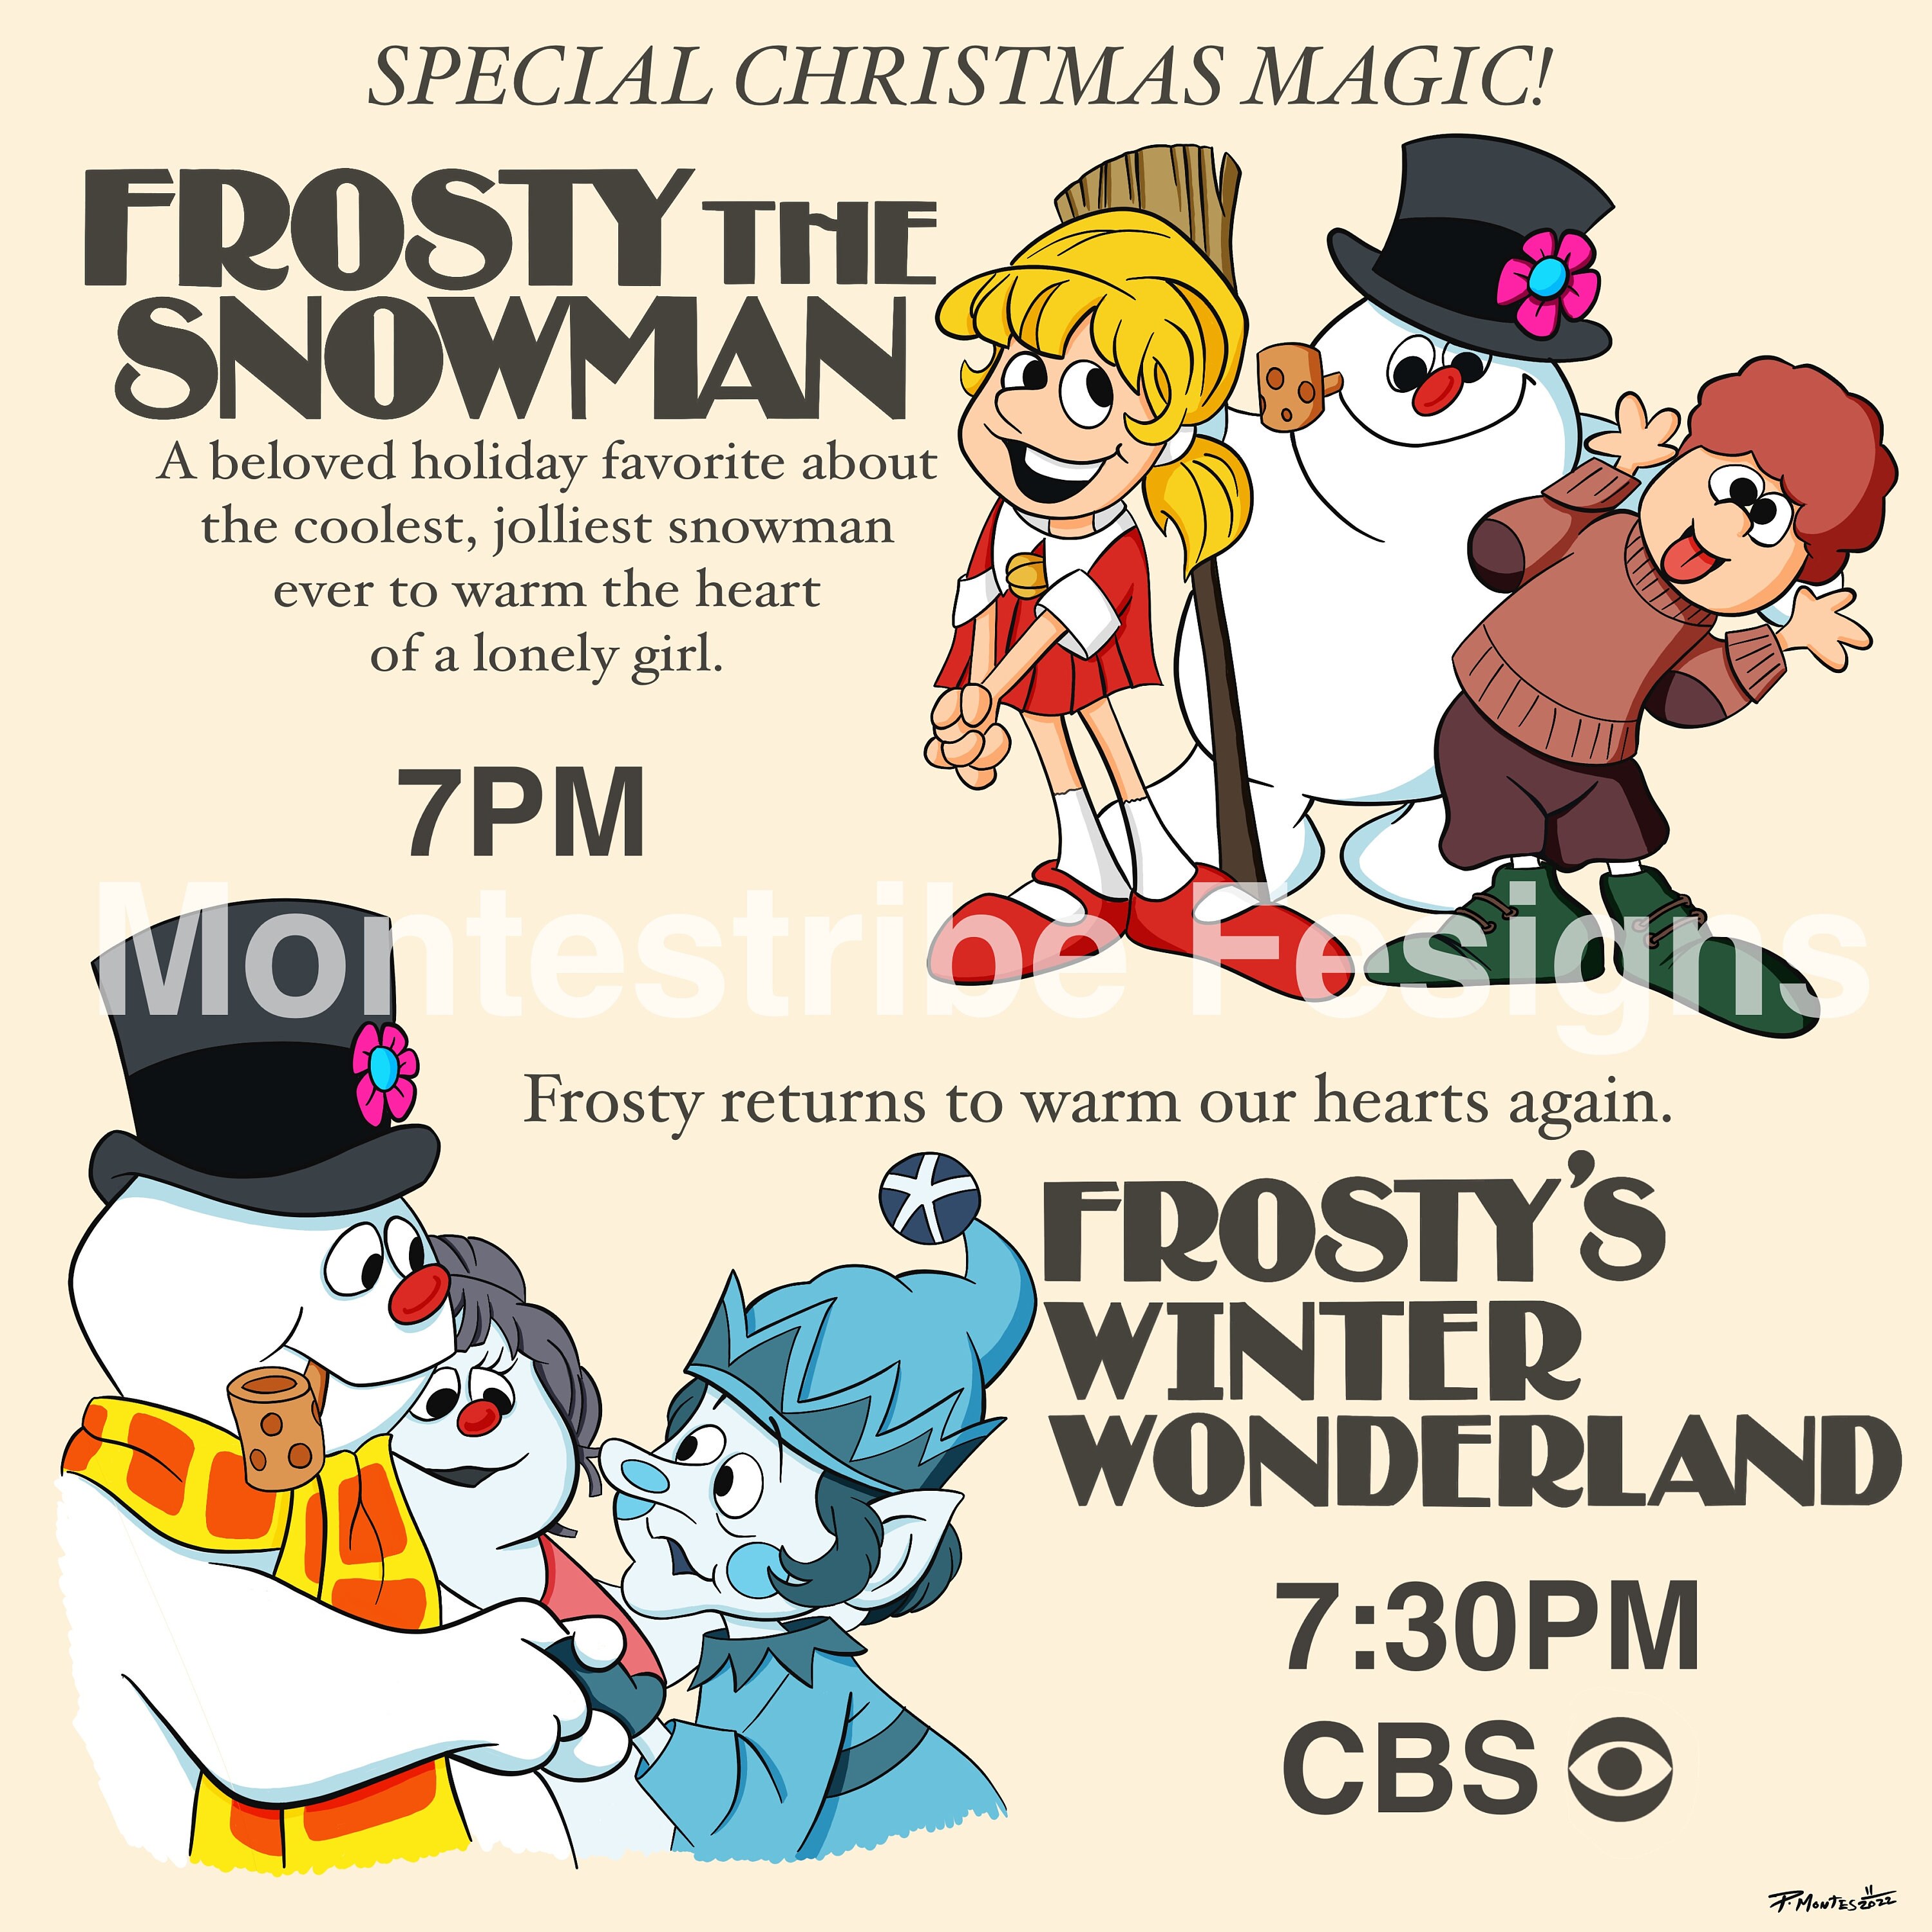 frosty the snowman movie poster